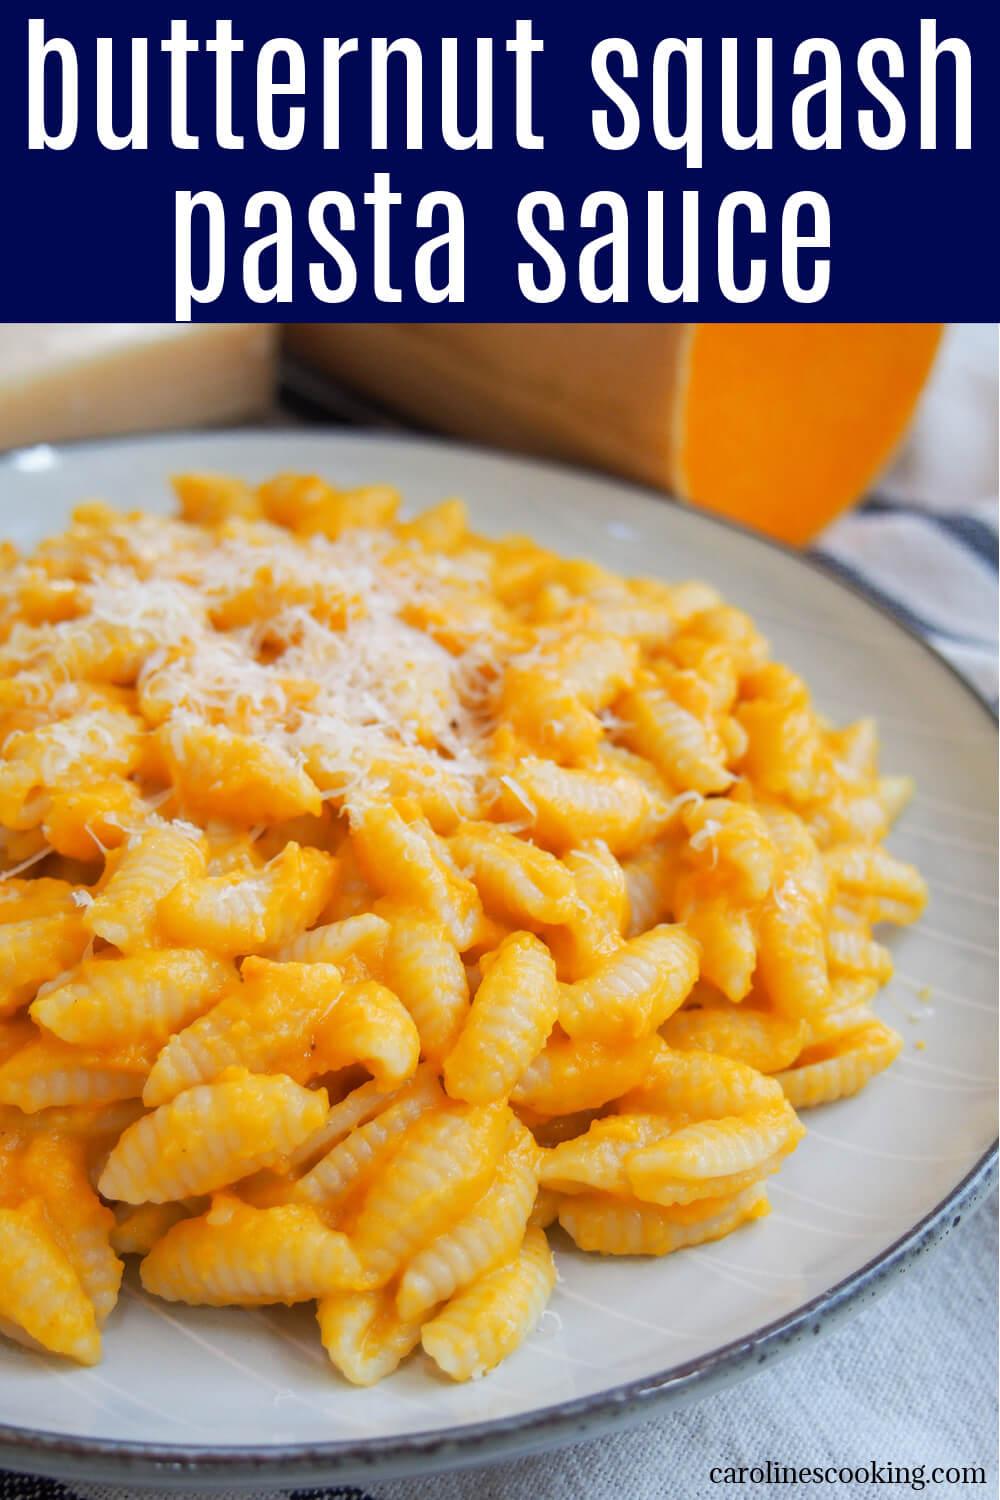 This simple butternut squash pasta sauce is quick and easy to make.  It's creamy, comforting and perfect with pasta or gnocchi.  The more you can prepare it ahead.